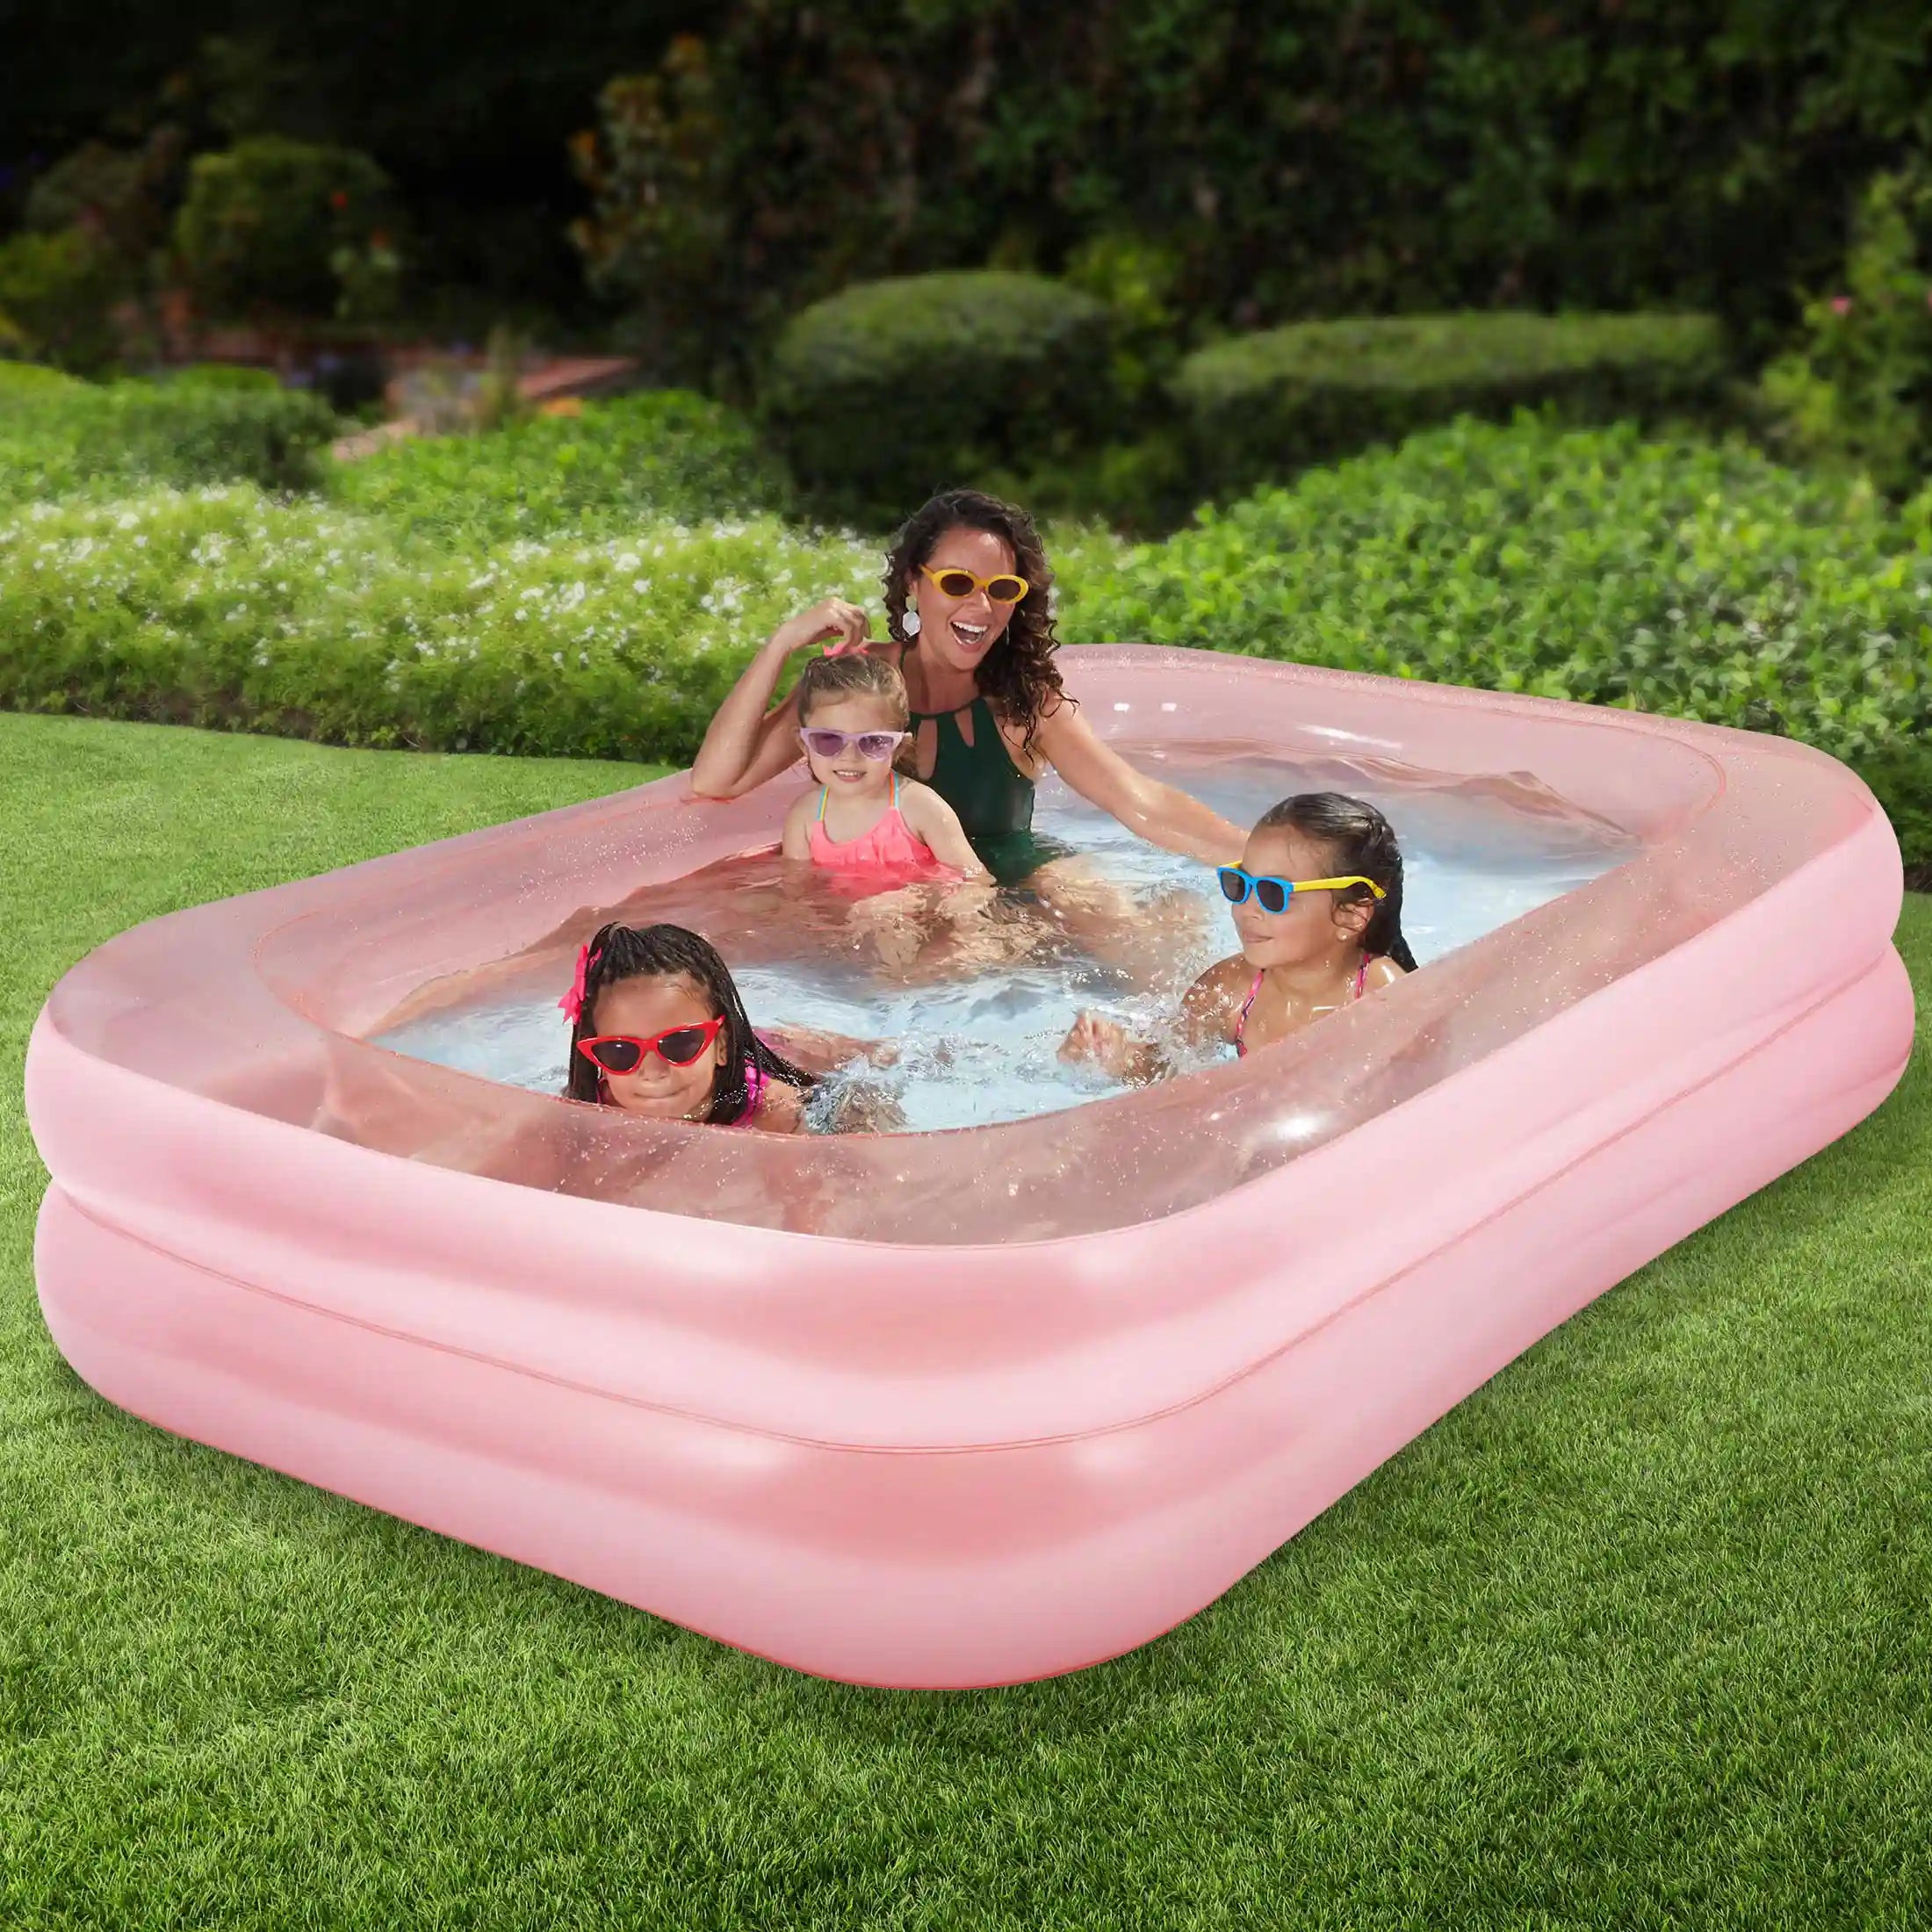 Funsicle Blissful Pool Pink with people on a grass background